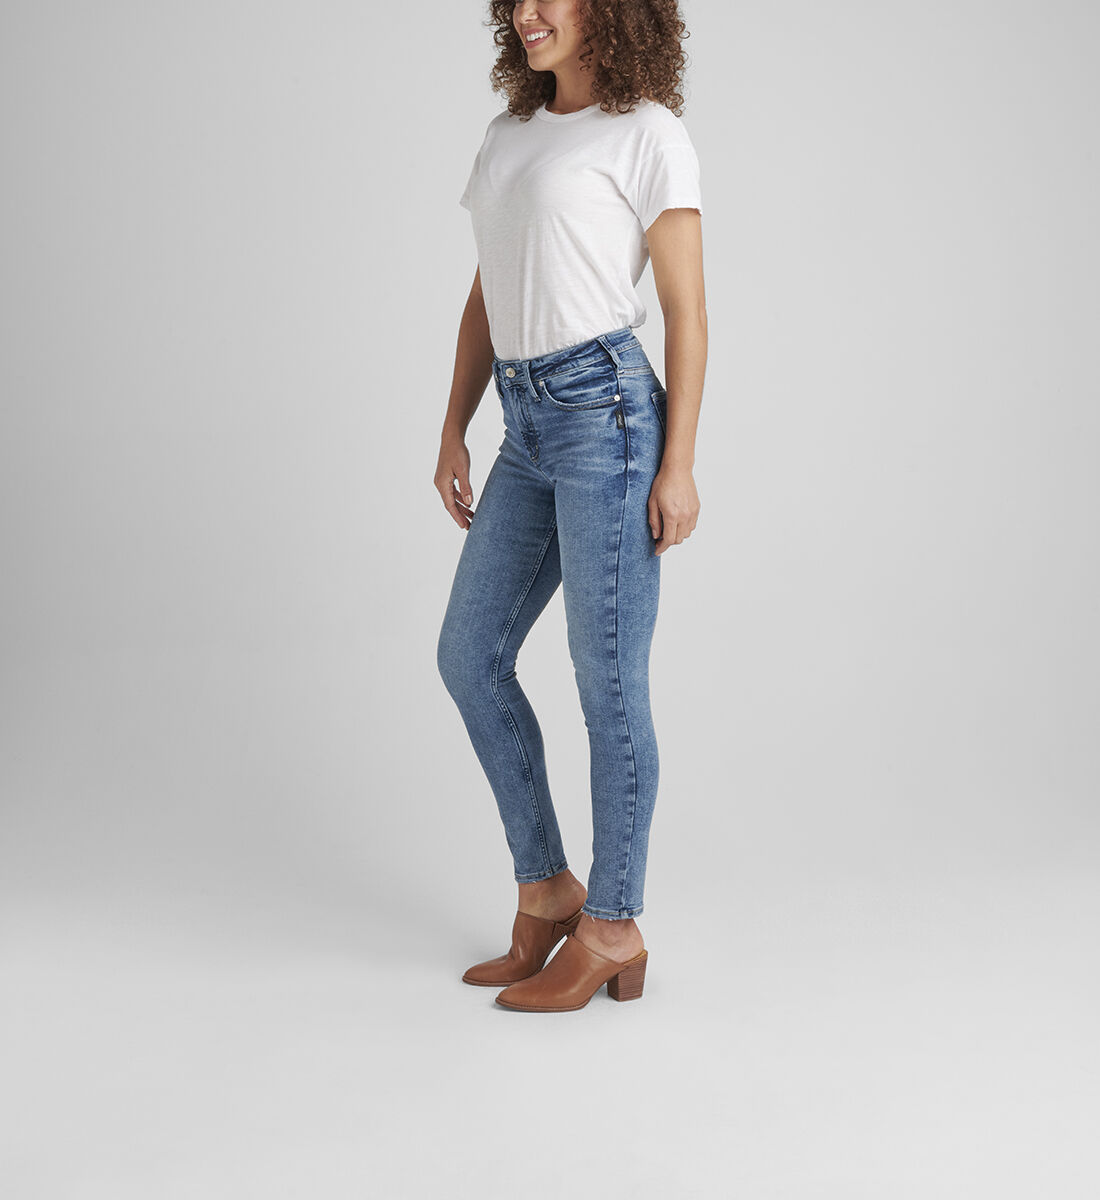 Infinite Fit High Rise Skinny Jeans Side